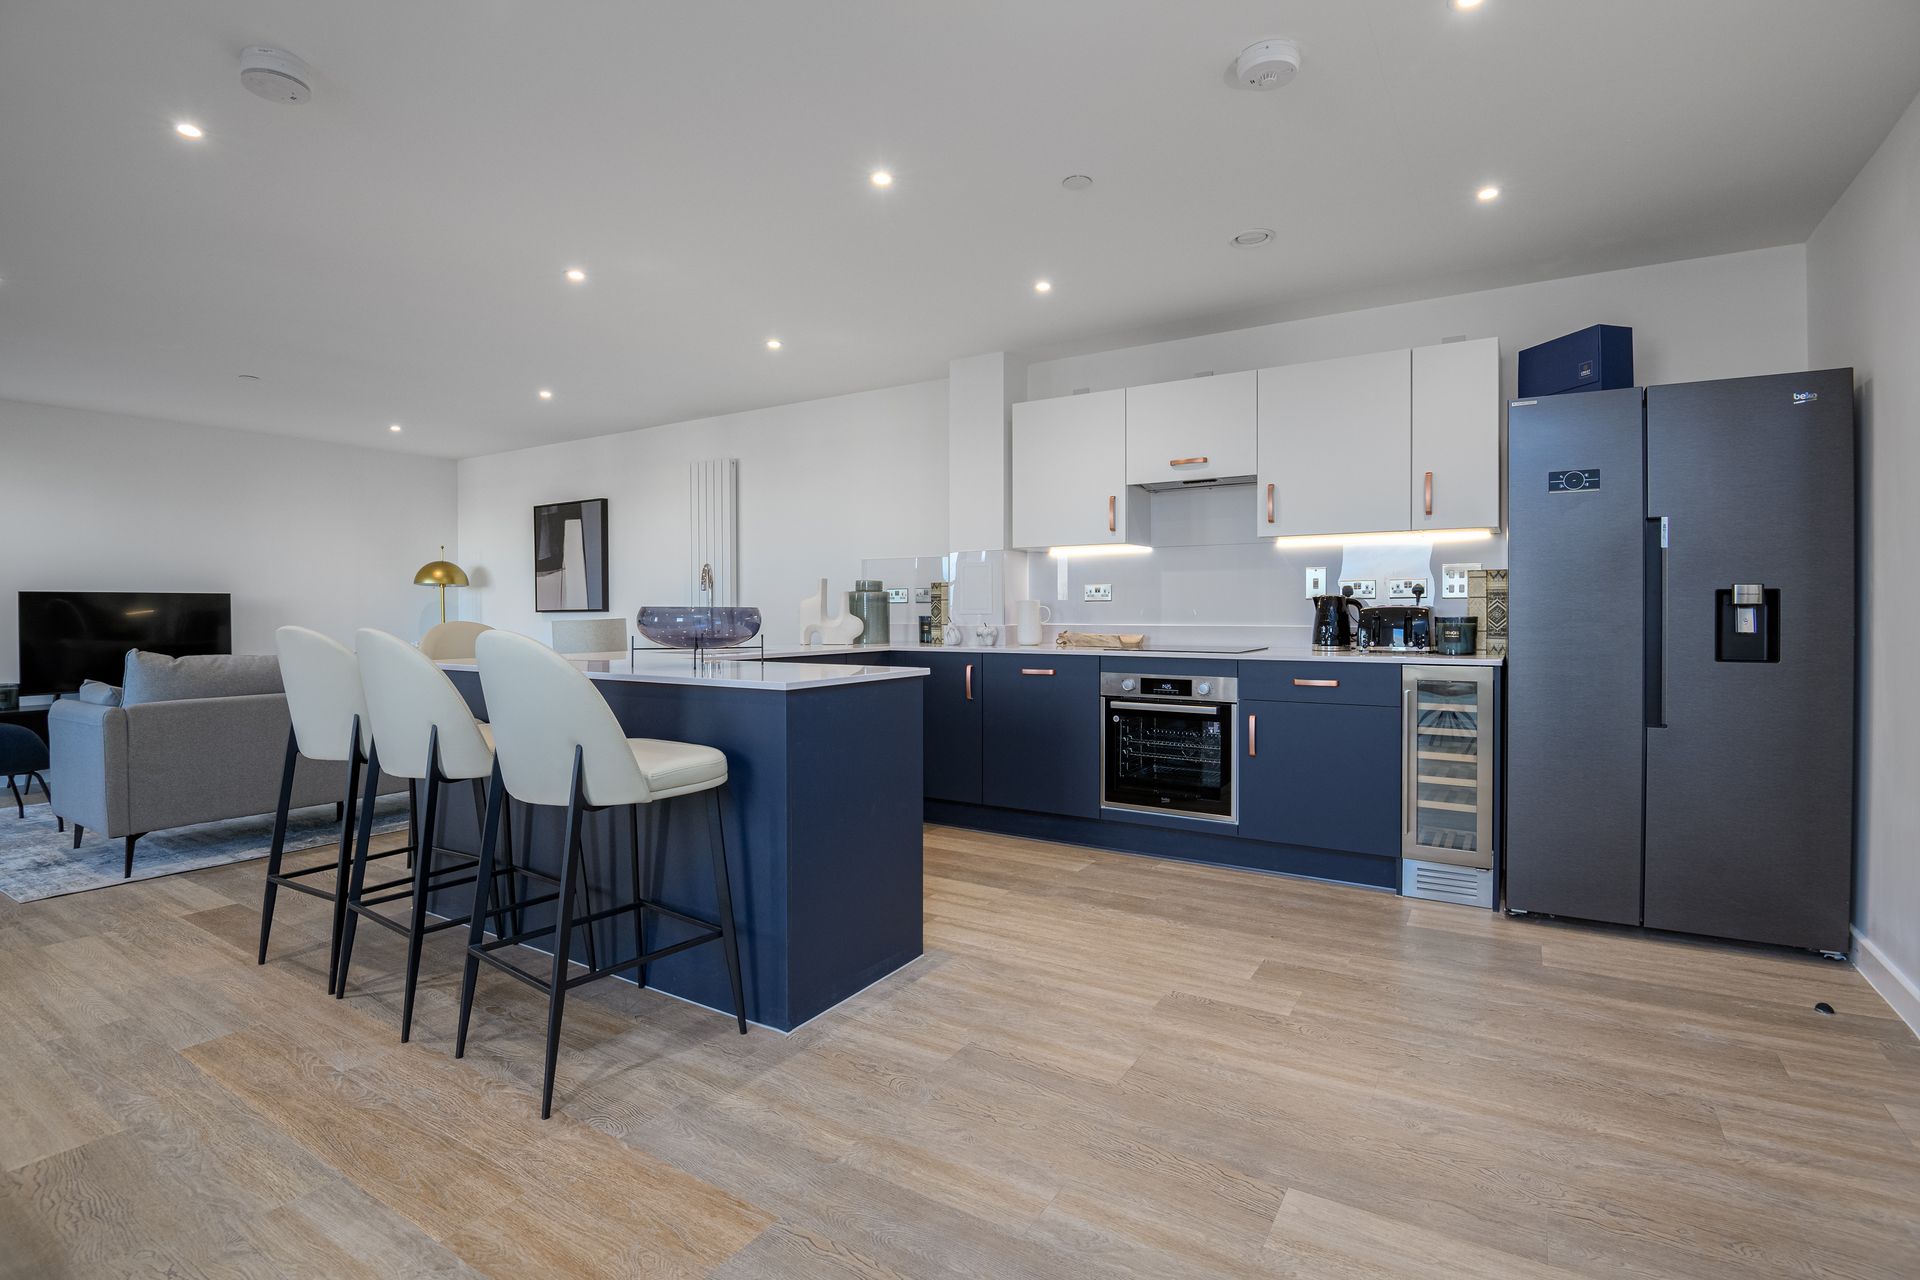 A kitchen with blue cabinets , white cabinets , stainless steel appliances and a refrigerator at Walton Court.